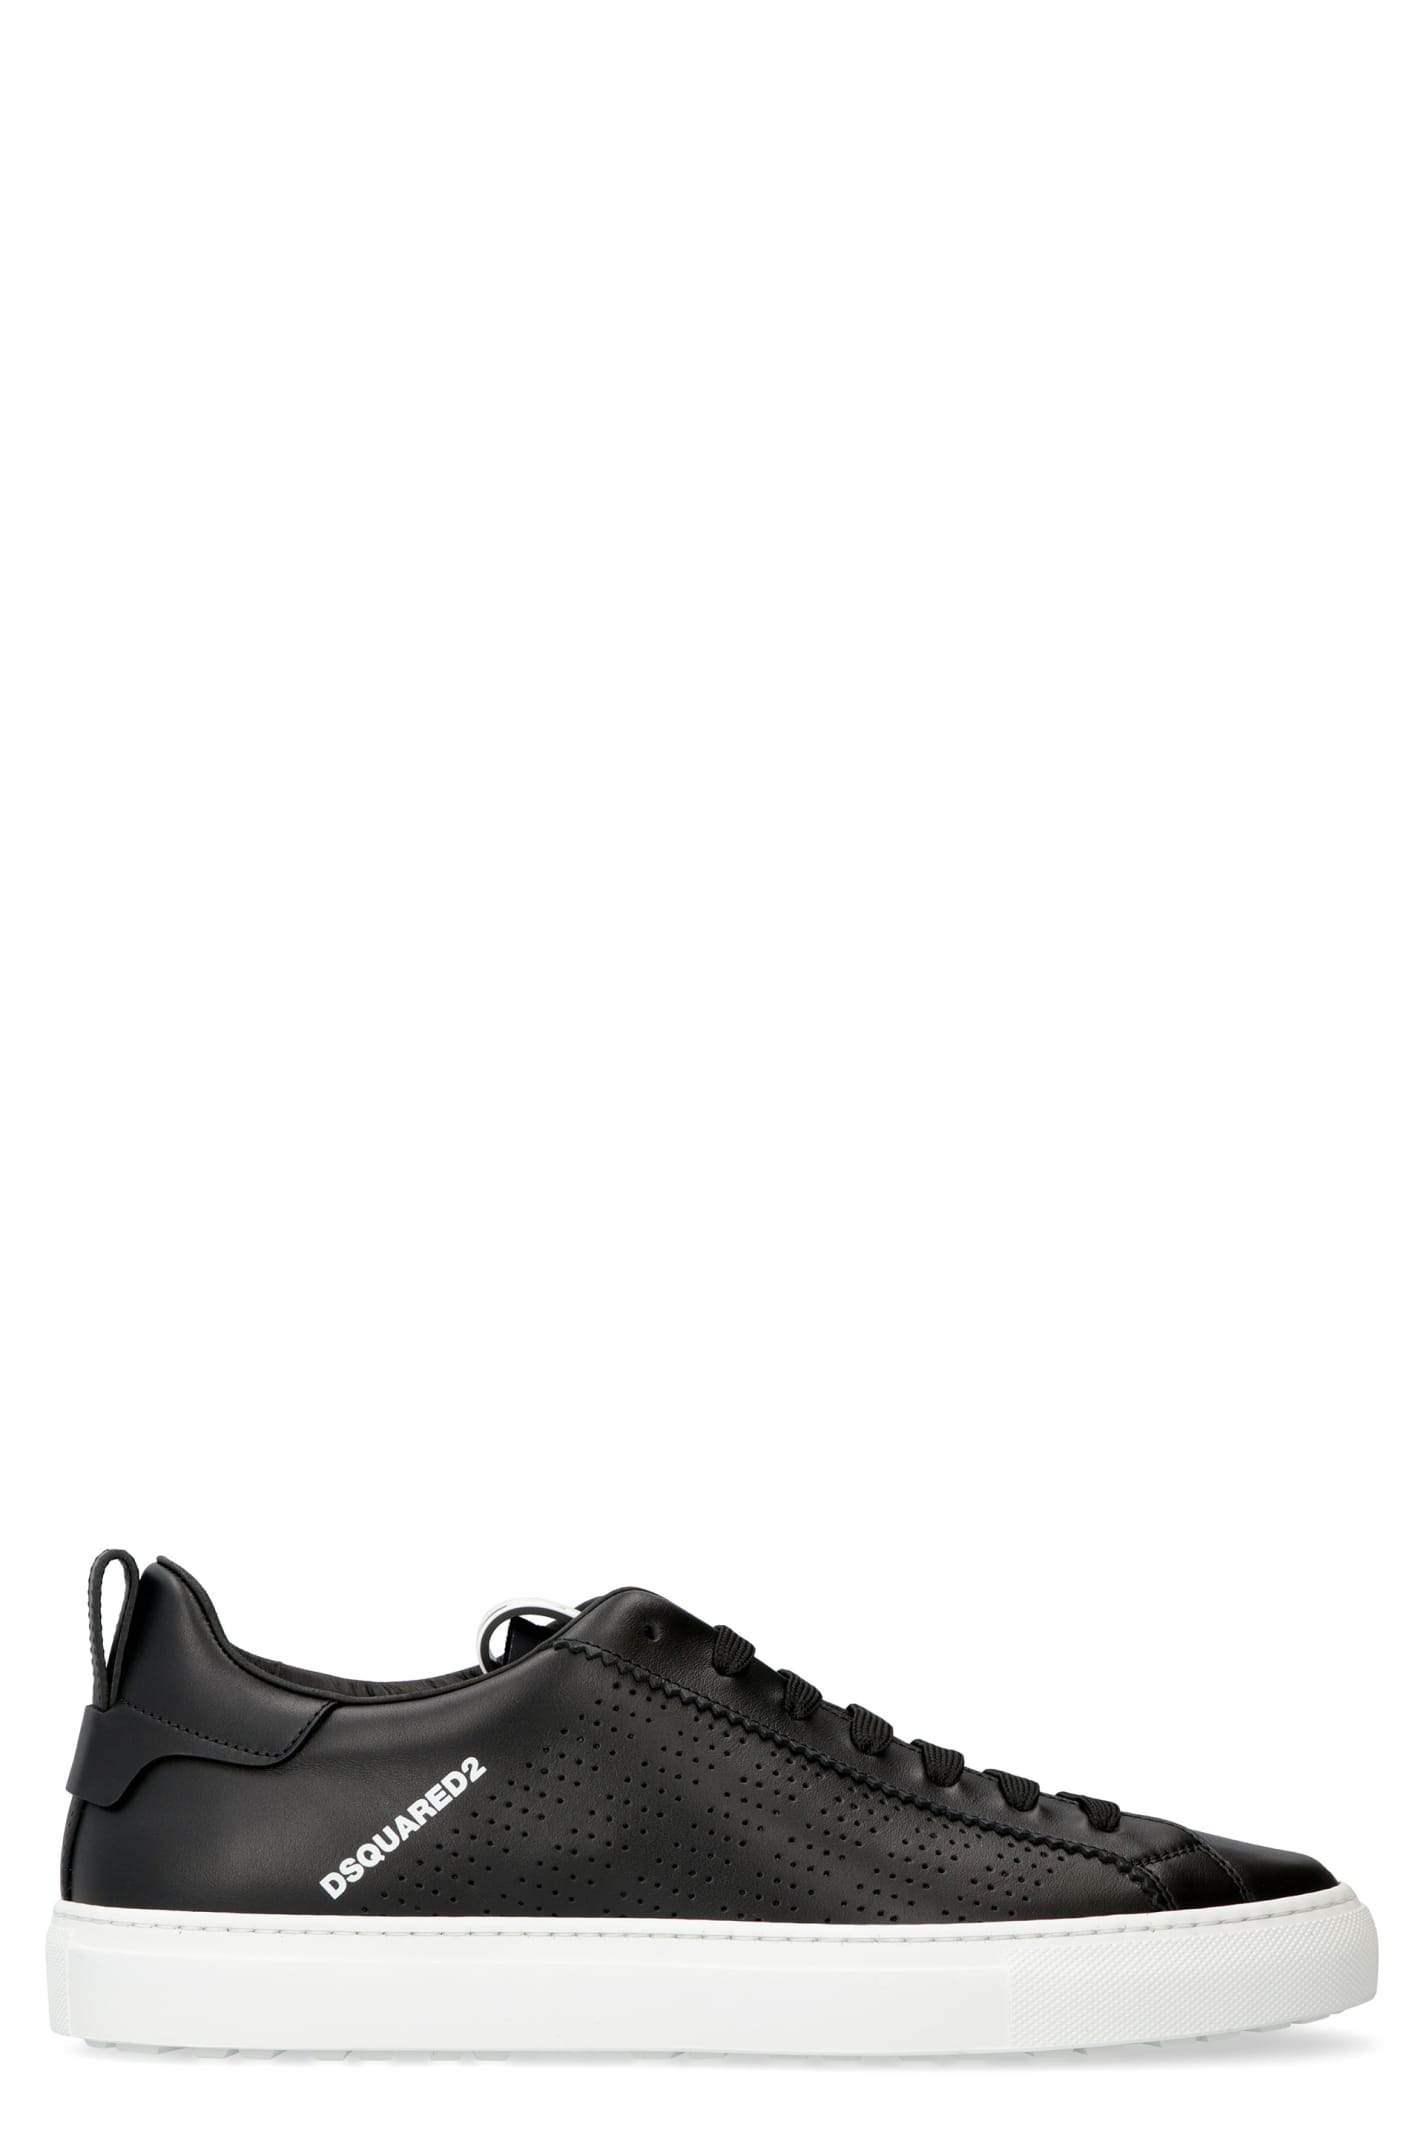 Dsquared2 San Diego Leather Low-top Sneakers